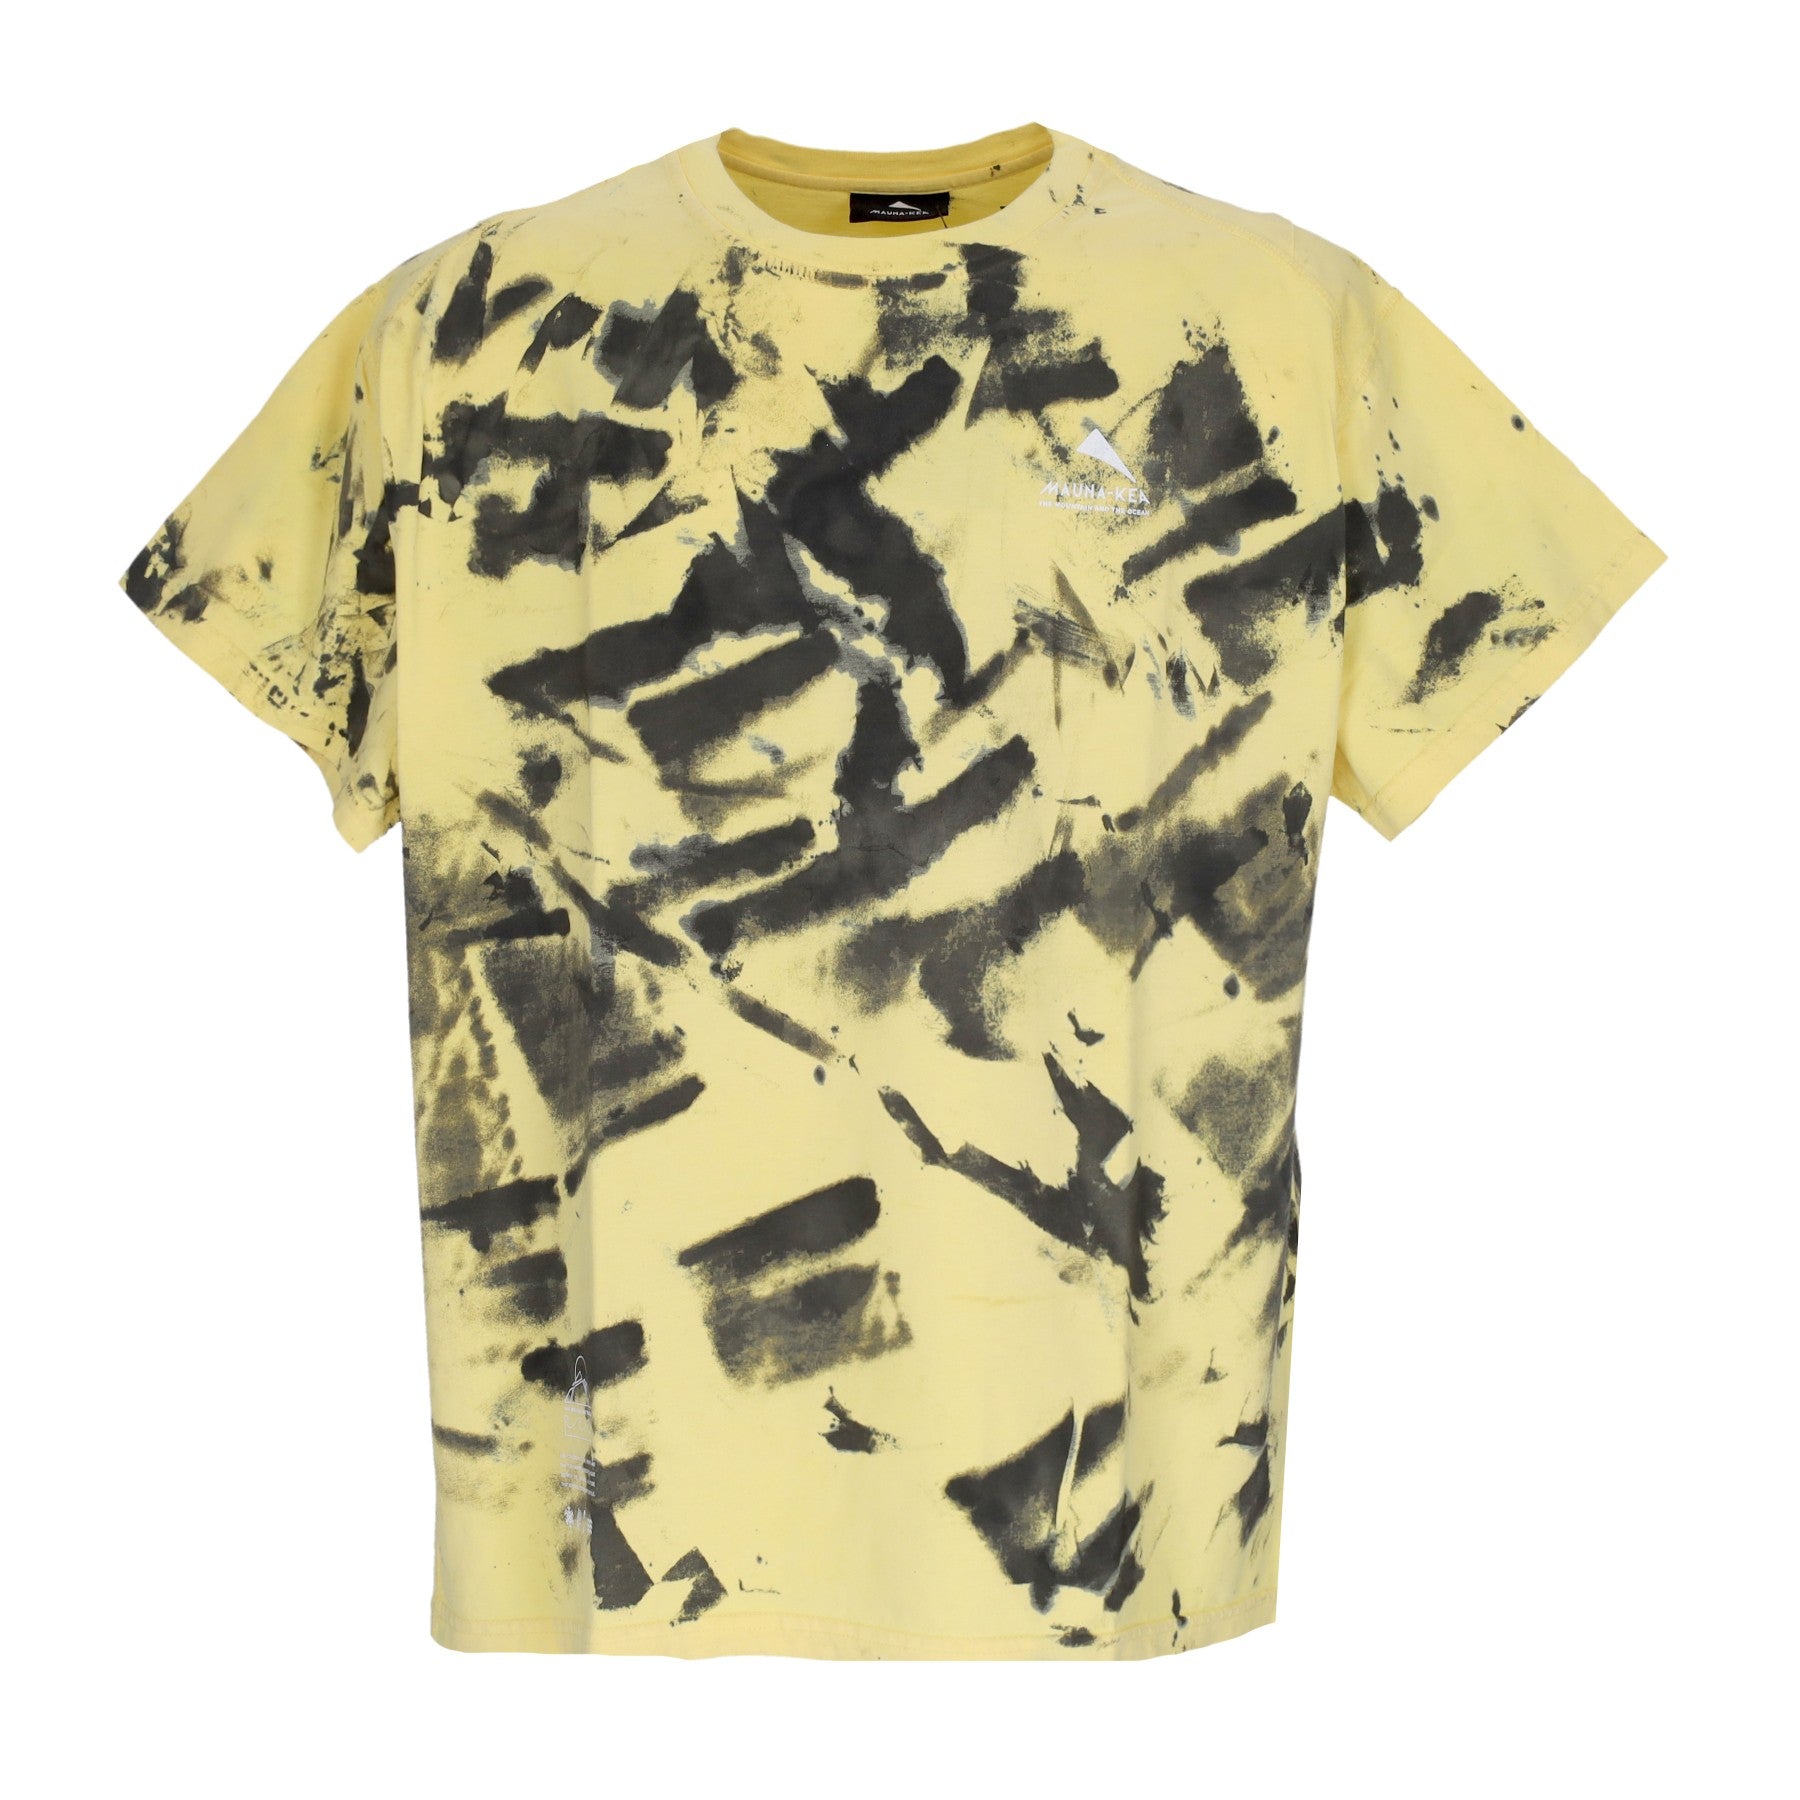 Men's T-Shirt Hand Brushed Dyed Over Tee Black/yellow